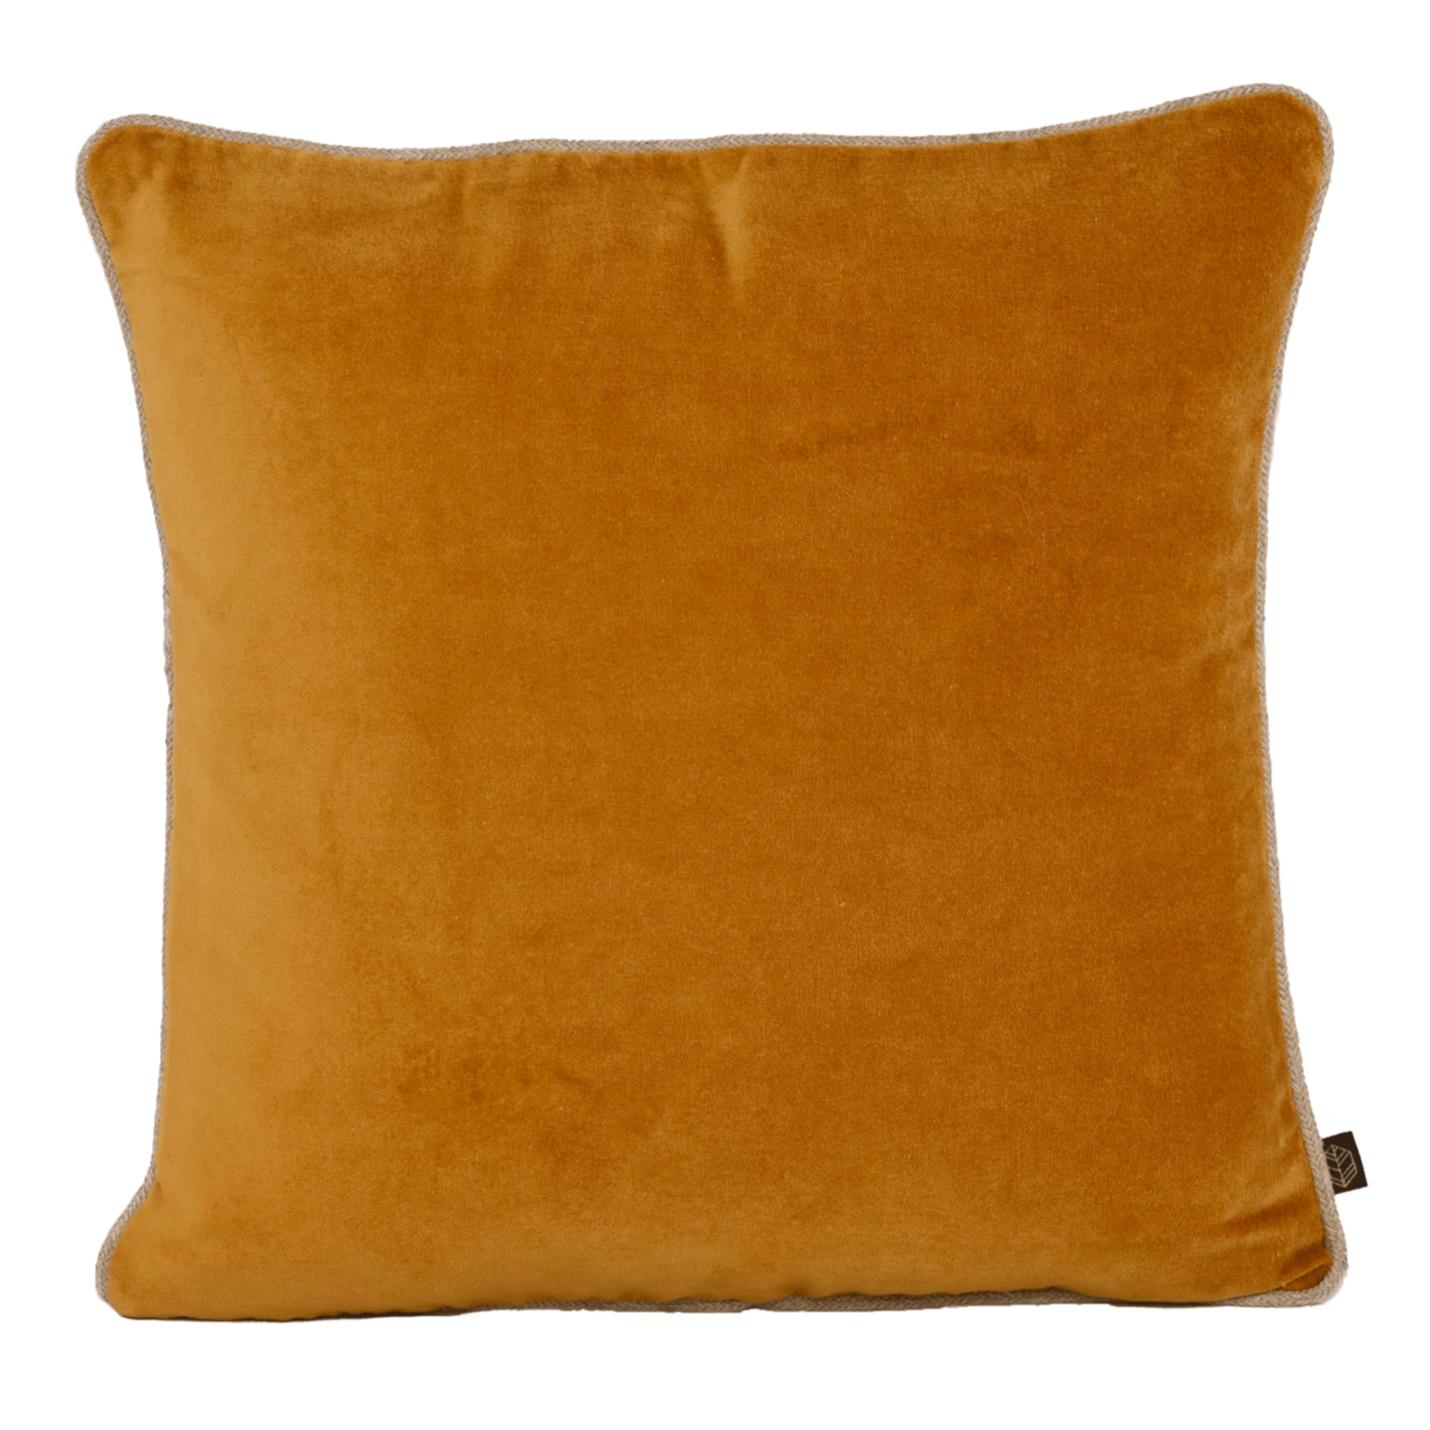 Piped Velvet Cushion - Suede